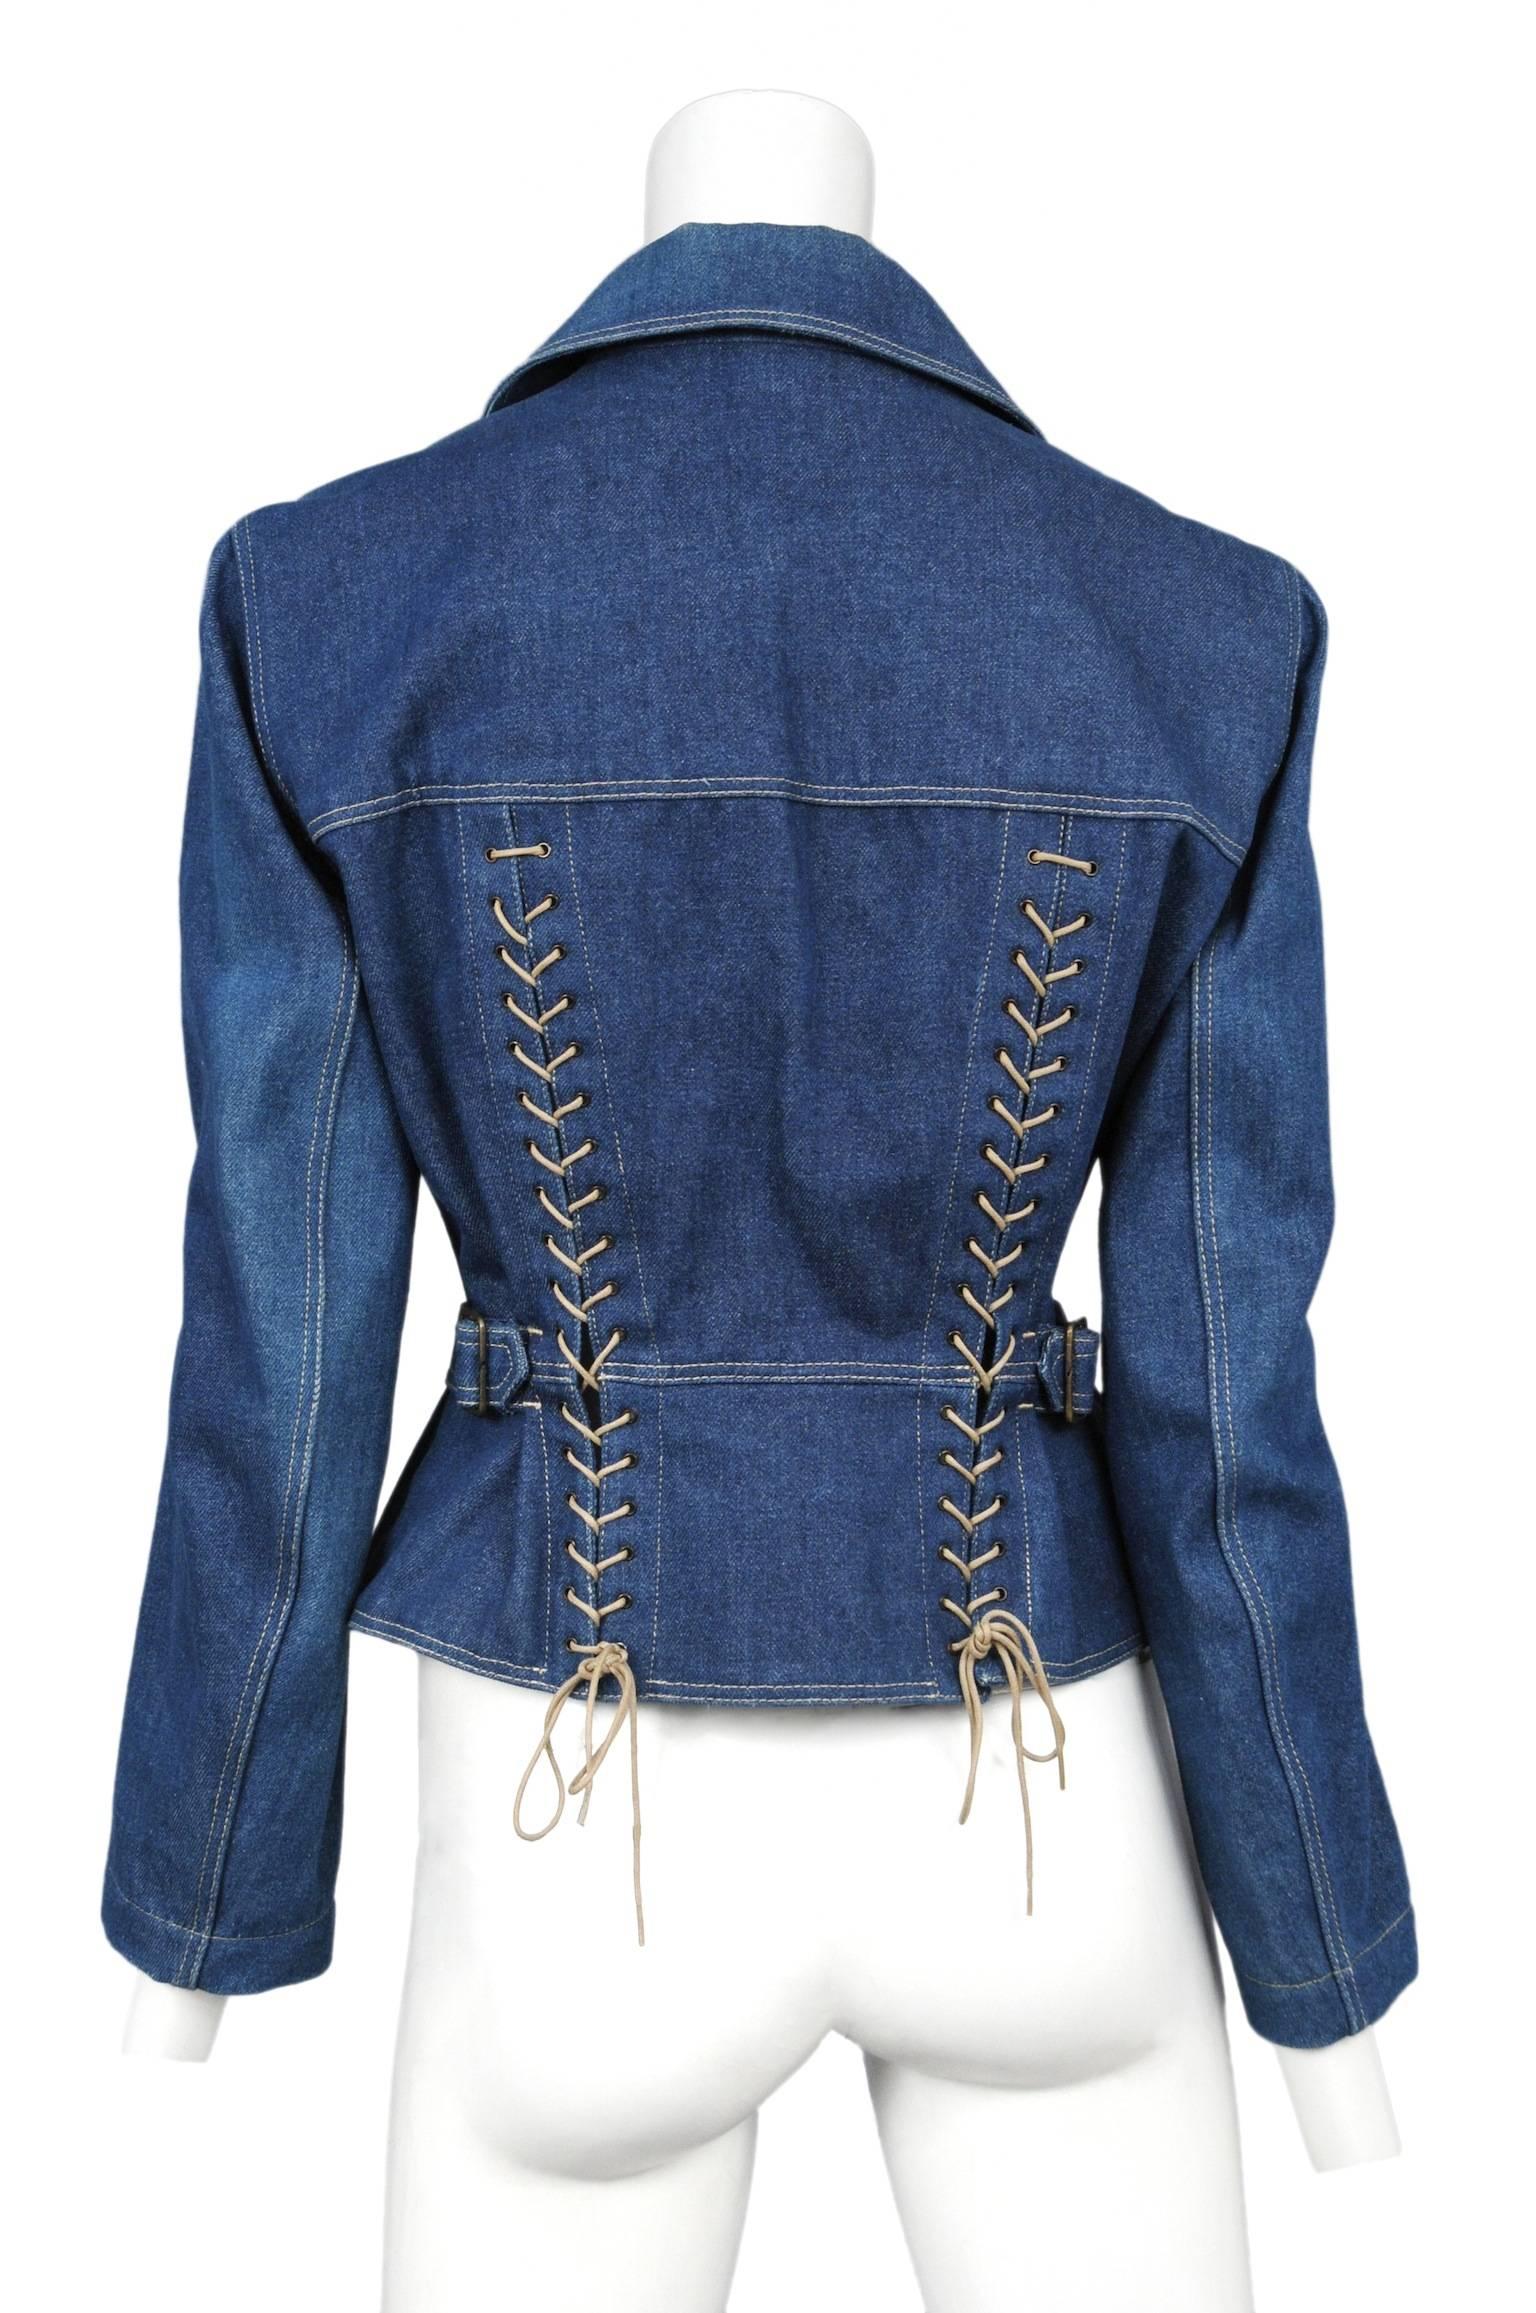 Vintage Azzedine Alaia blue denim double breasted jacket featuring lace up detailing along both darts at the back. Good Vintage Condition with minor fading along the sleeves, shoulders and collar.

Please contact us for additional photos.